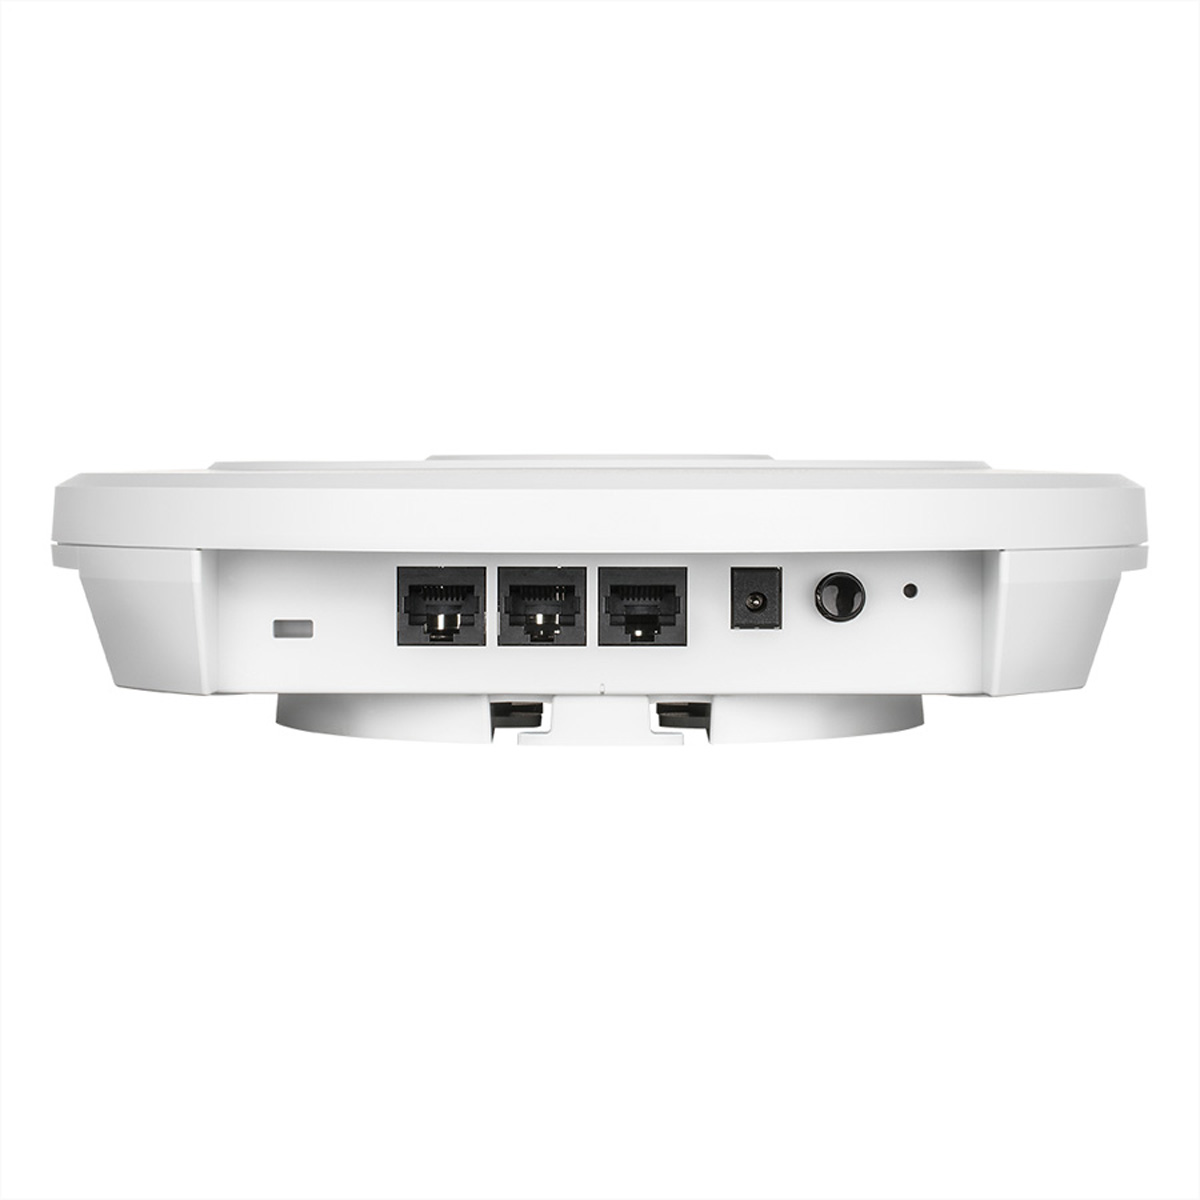 D-LINK DWL-7620AP Unified LAN Gbit/s 2,2 AC2200 Point Wireless Access Wave2 Tri-Band